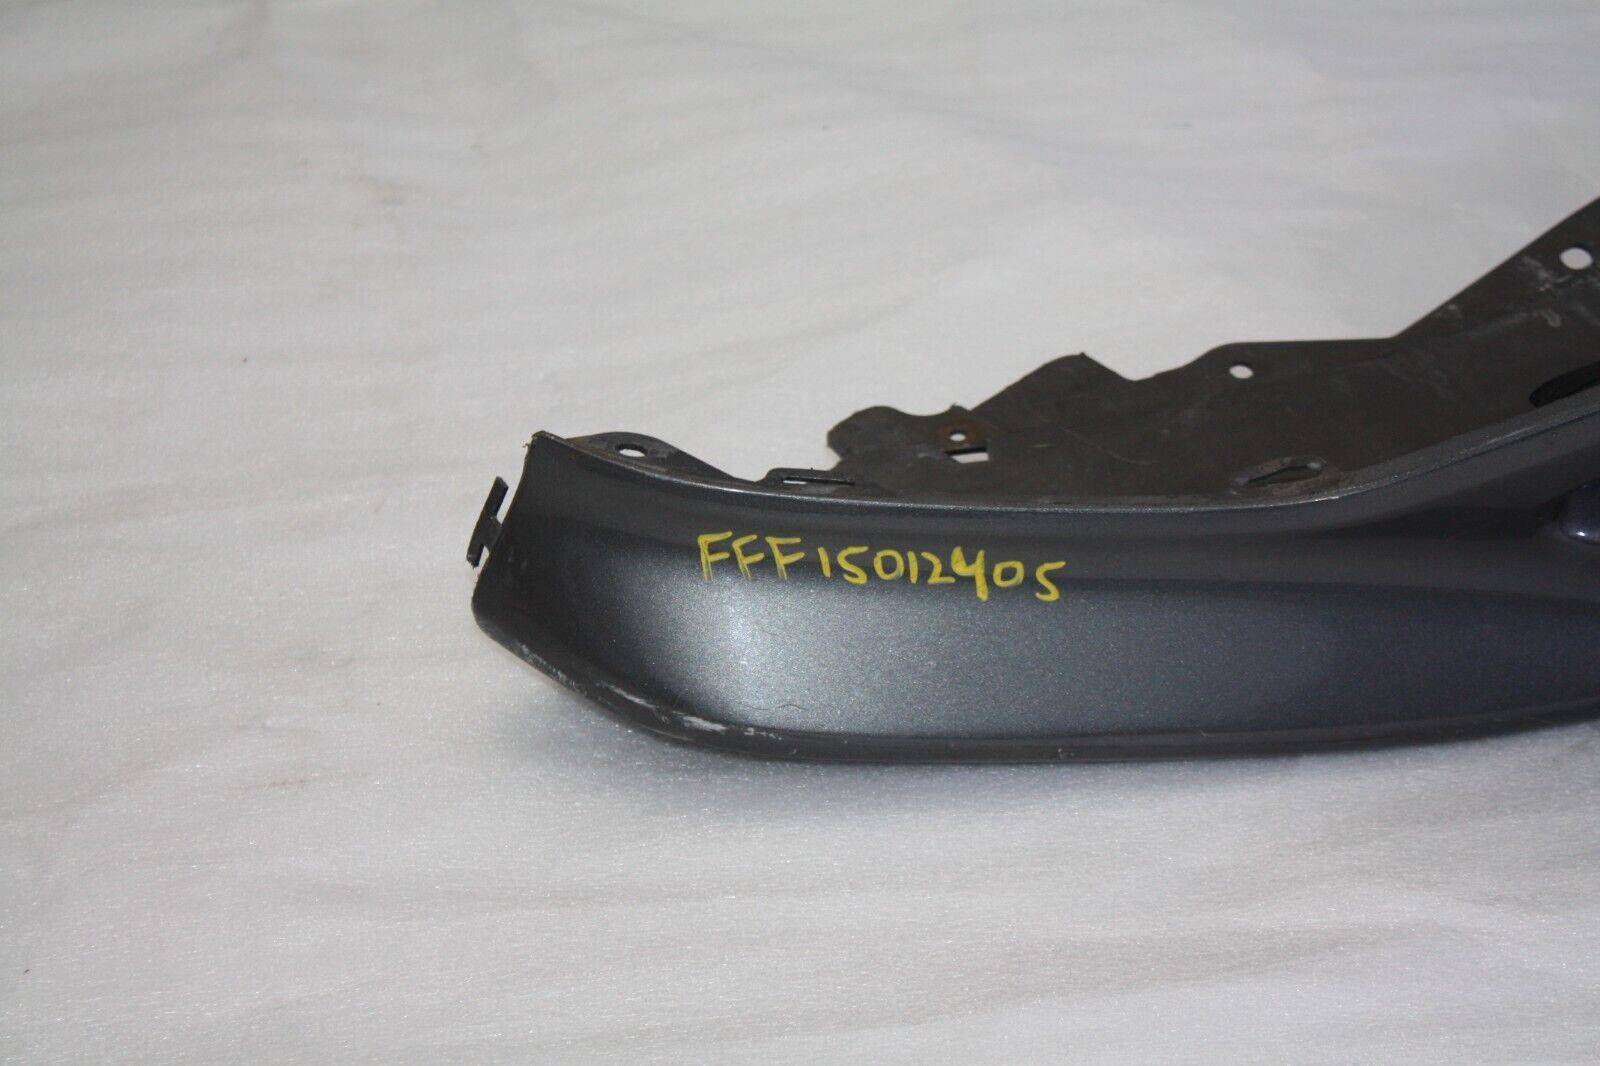 Honda-Civic-Front-Bumper-Lower-Section-2006-TO-2012-71102-SMRZ-ZZ00-Genuine-176183751704-6